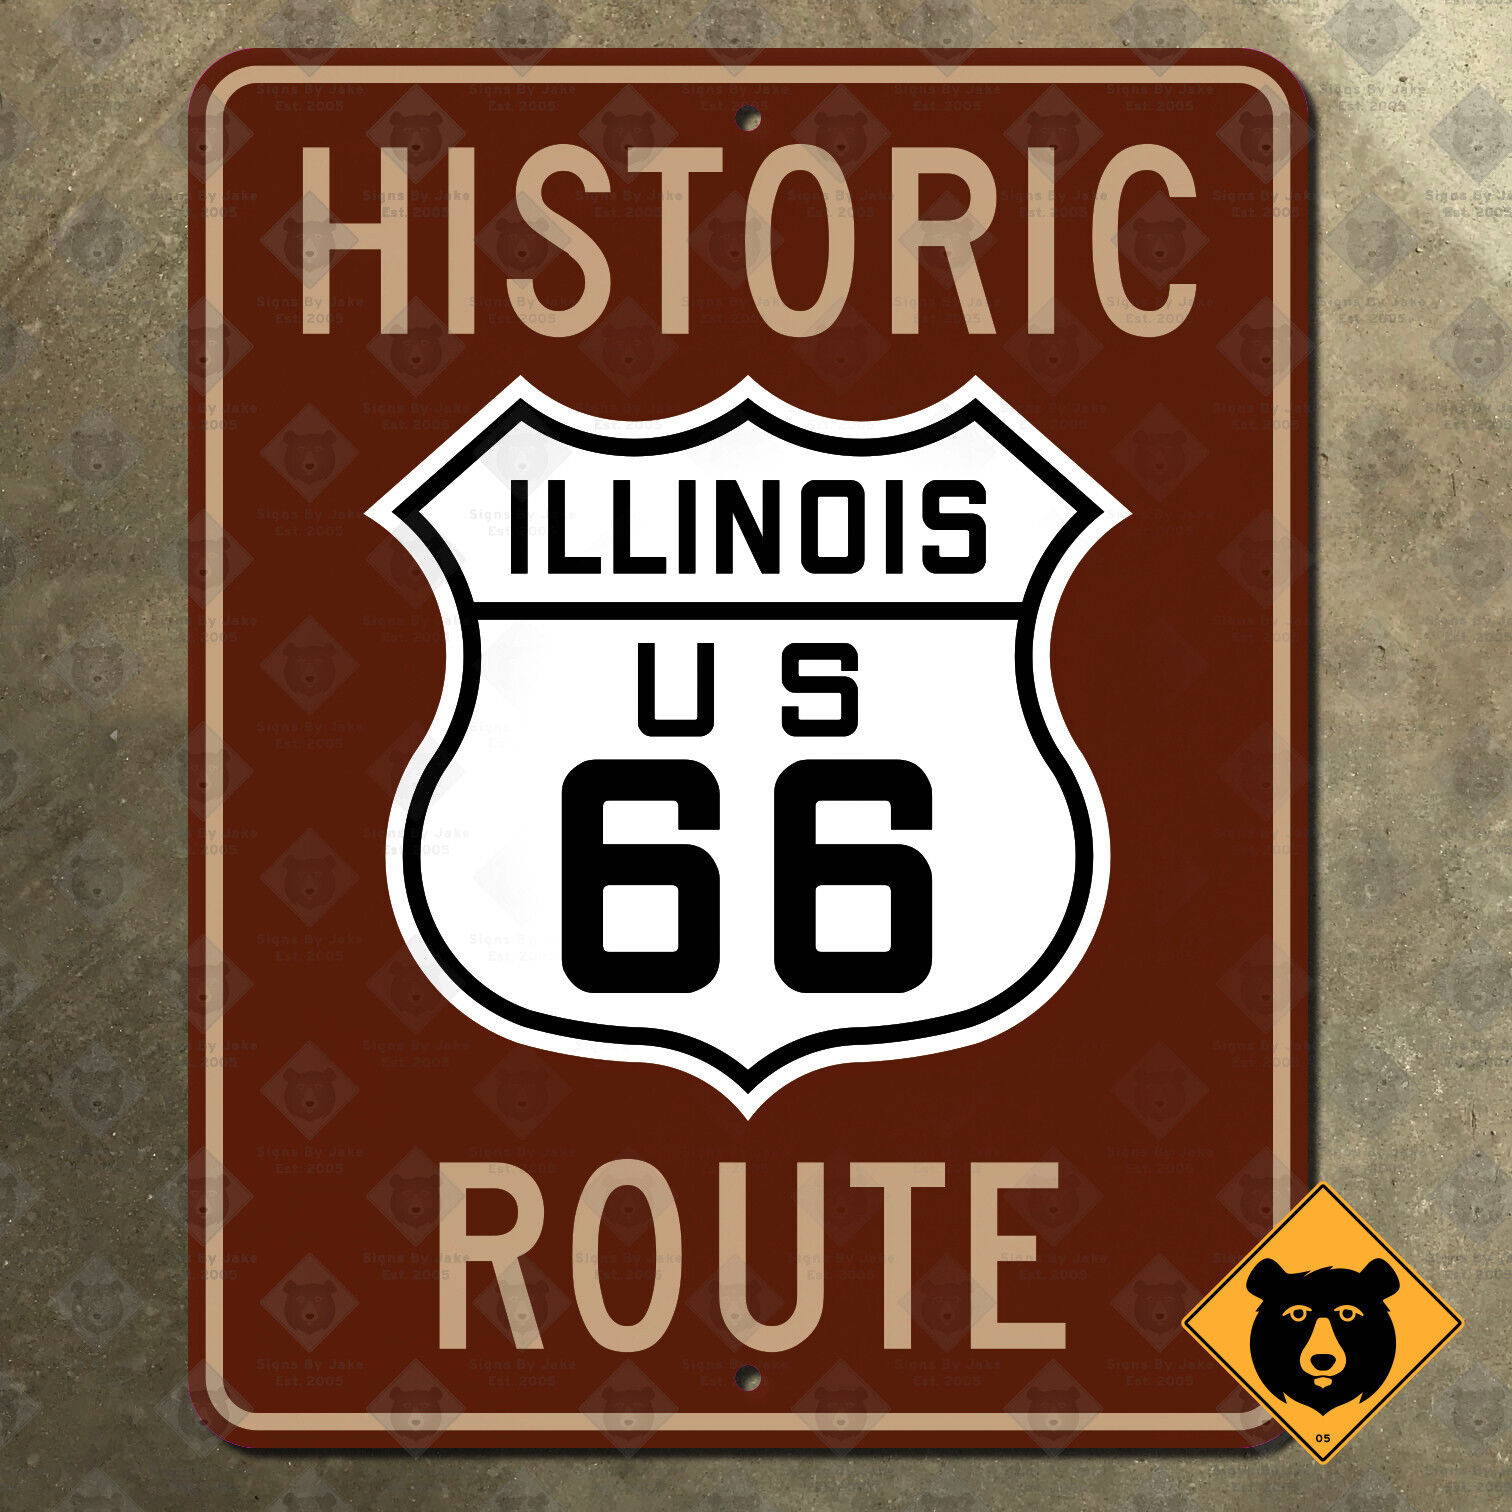 Illinois historic route US 66 Chicago highway road sign mother road 10x12